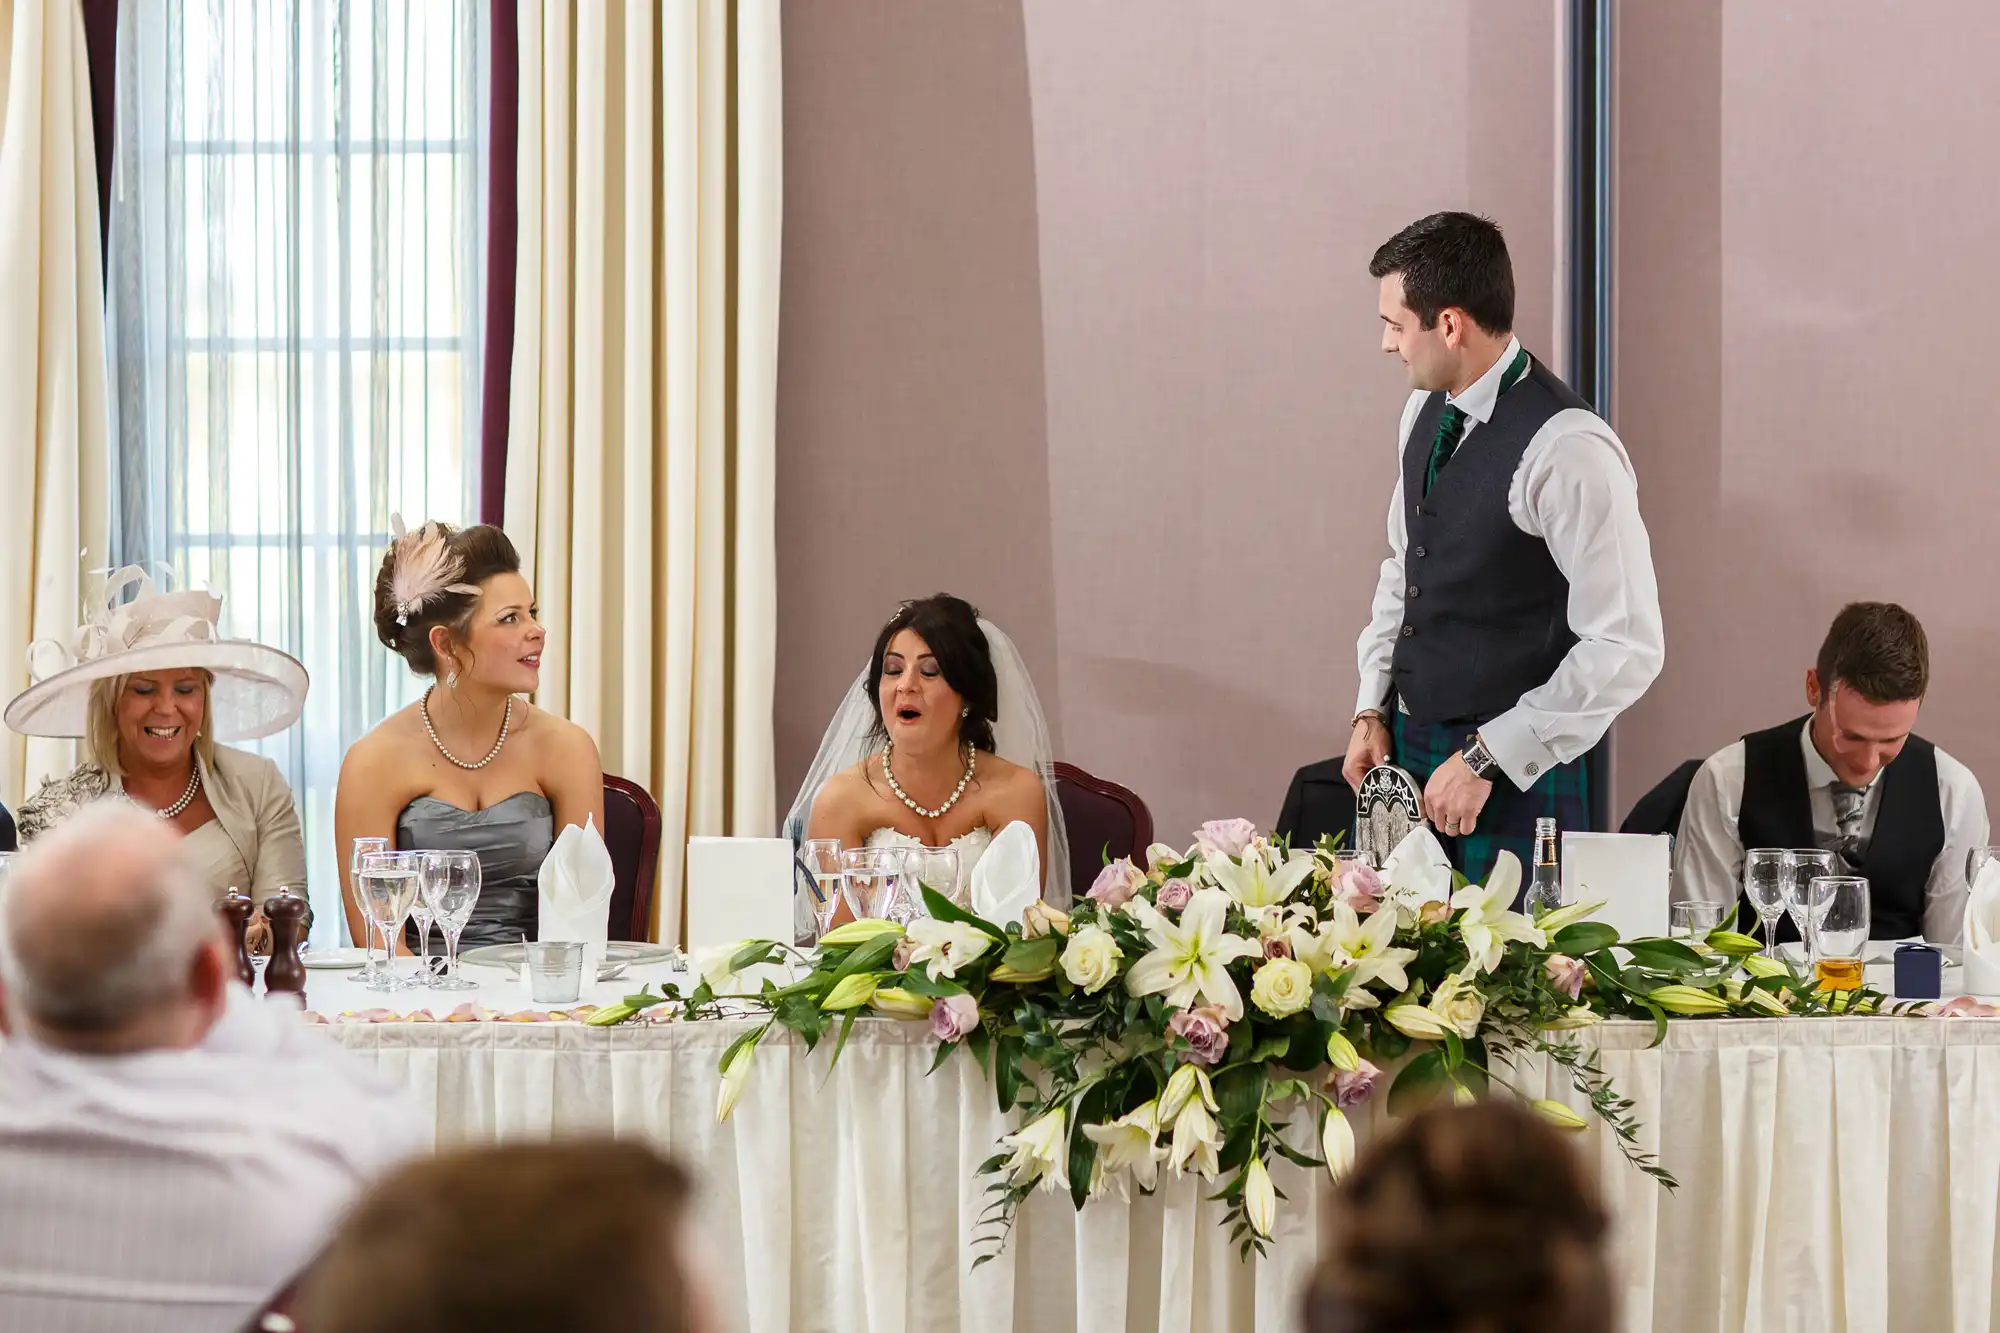 A man stands speaking at a wedding reception table, facing a group of seated guests who are visibly engaged and reacting with various expressions.